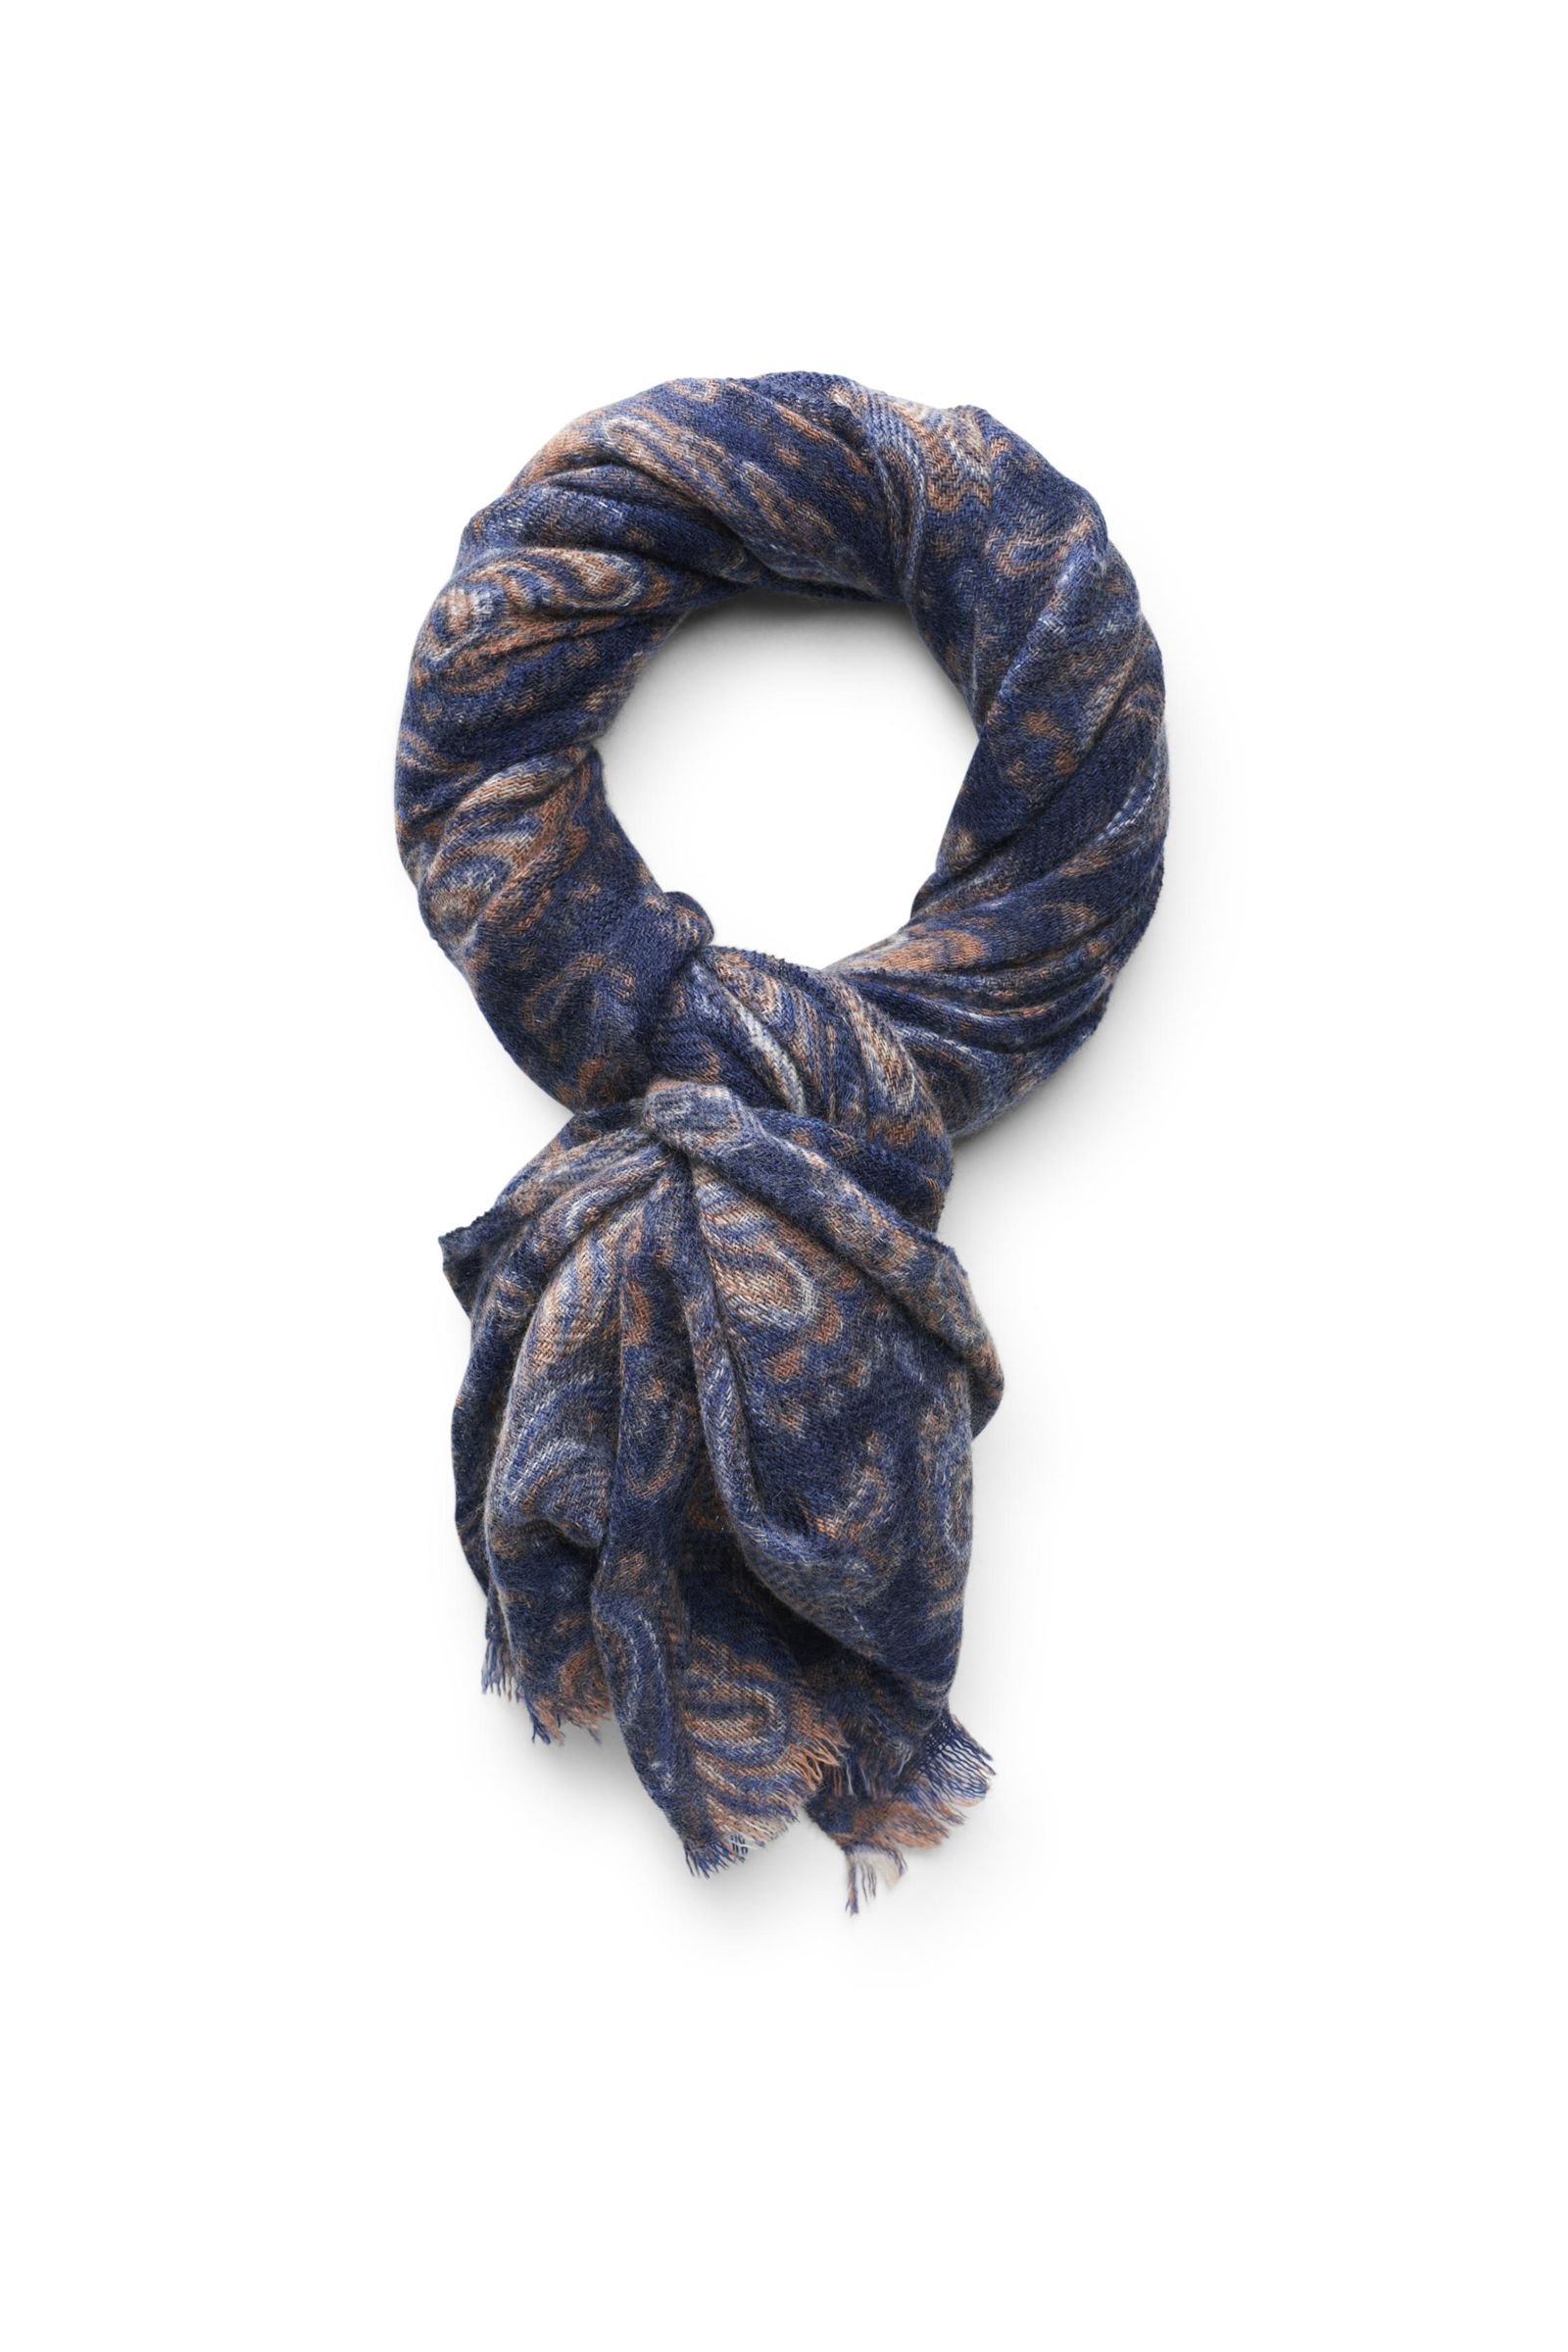 Cashmere scarf navy/rust brown patterned